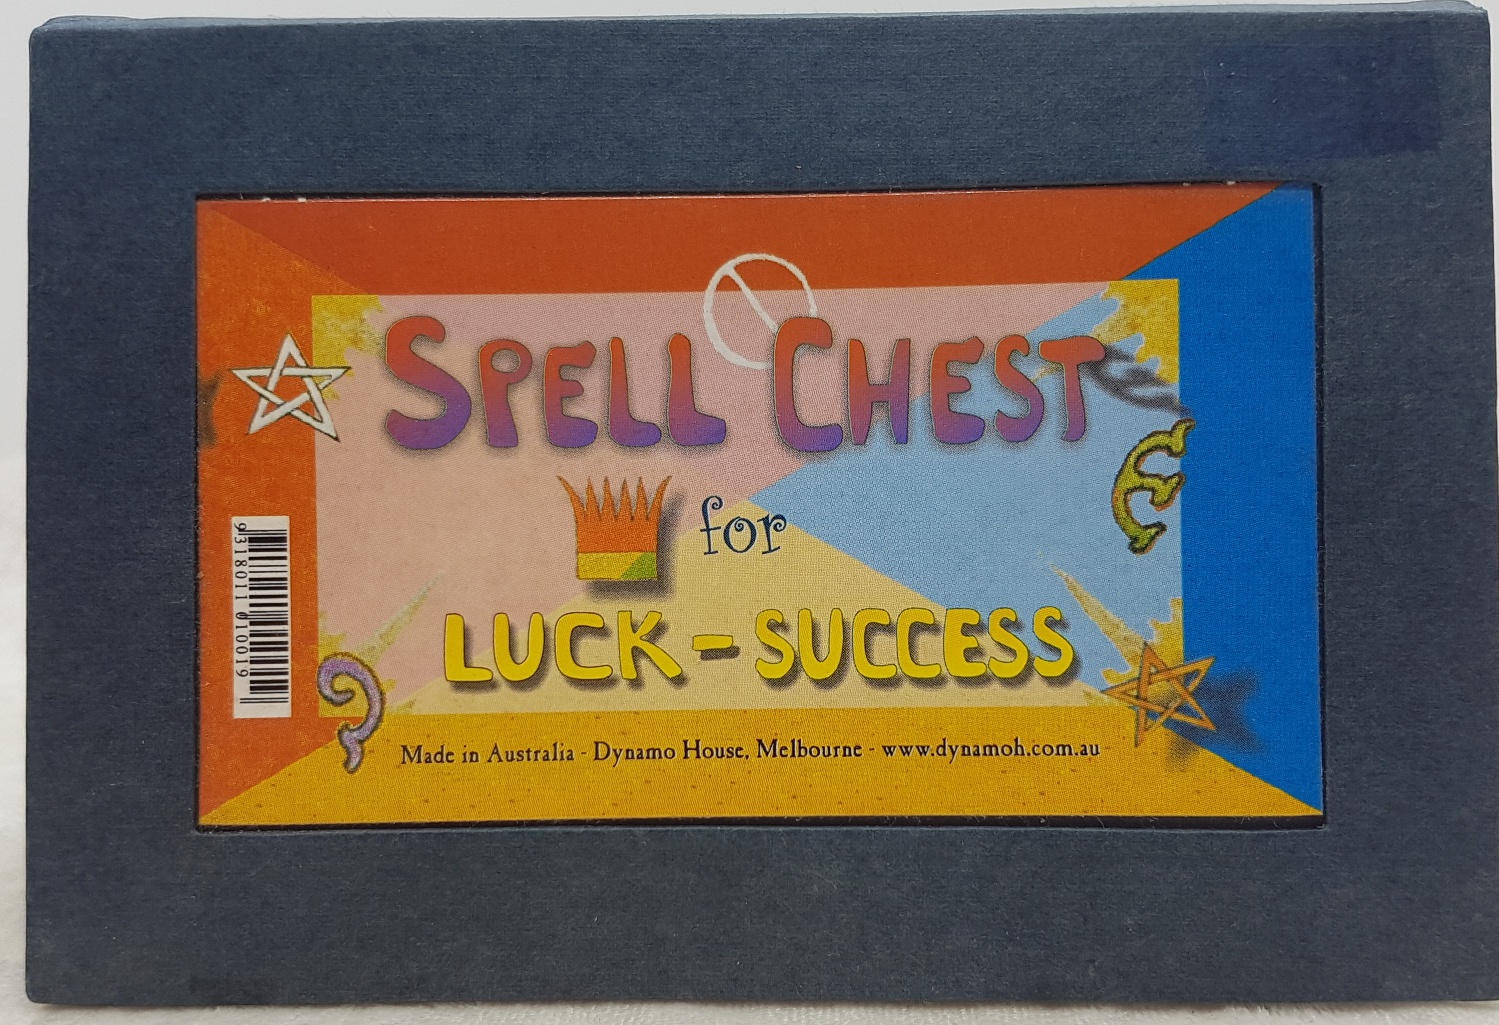 Spell Chest for Luck - Success